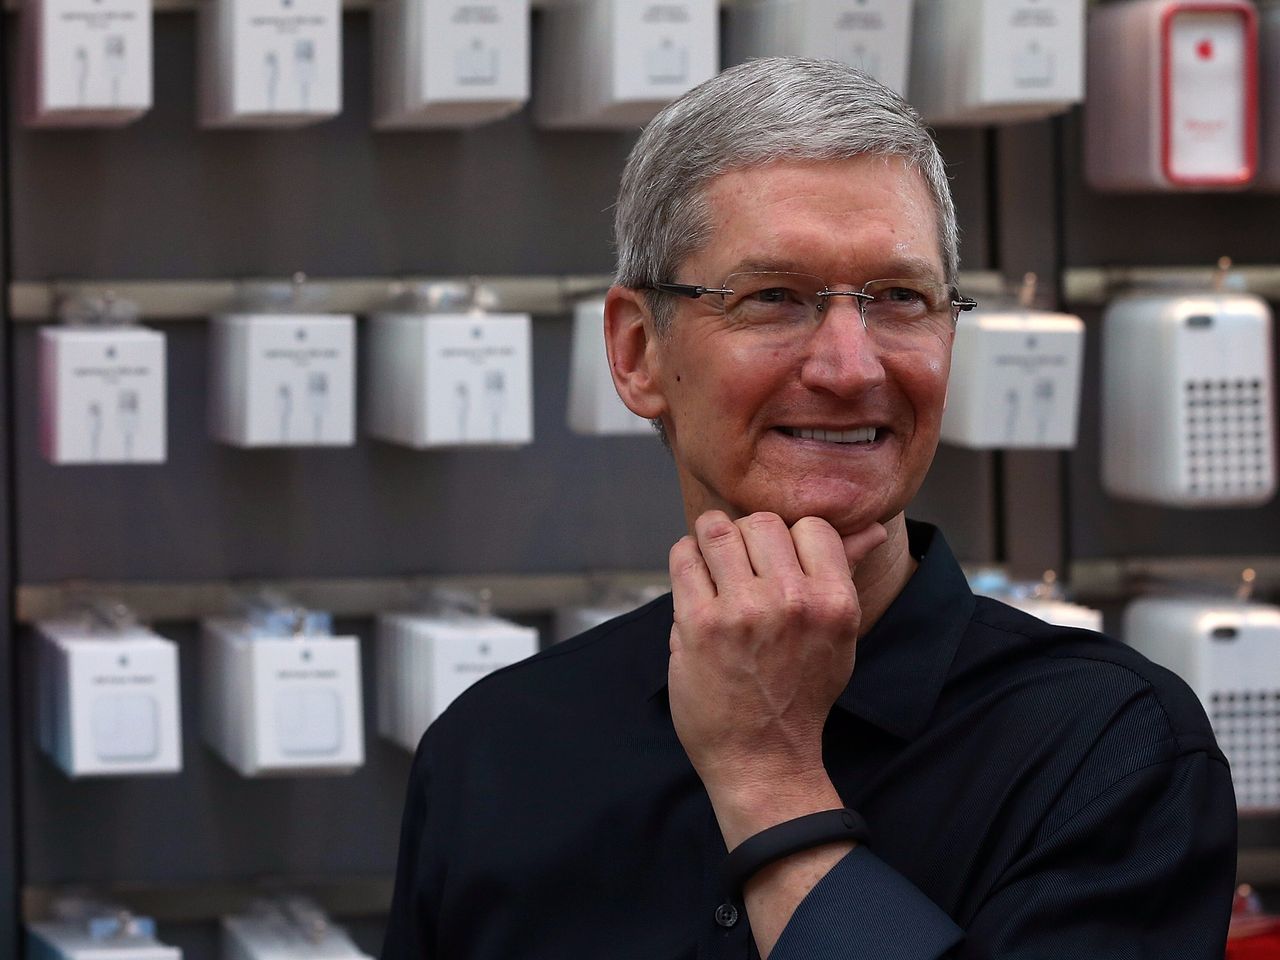 apples-ceo-sees-a-way-to-bring-back-billions-in-cash-from-overseas